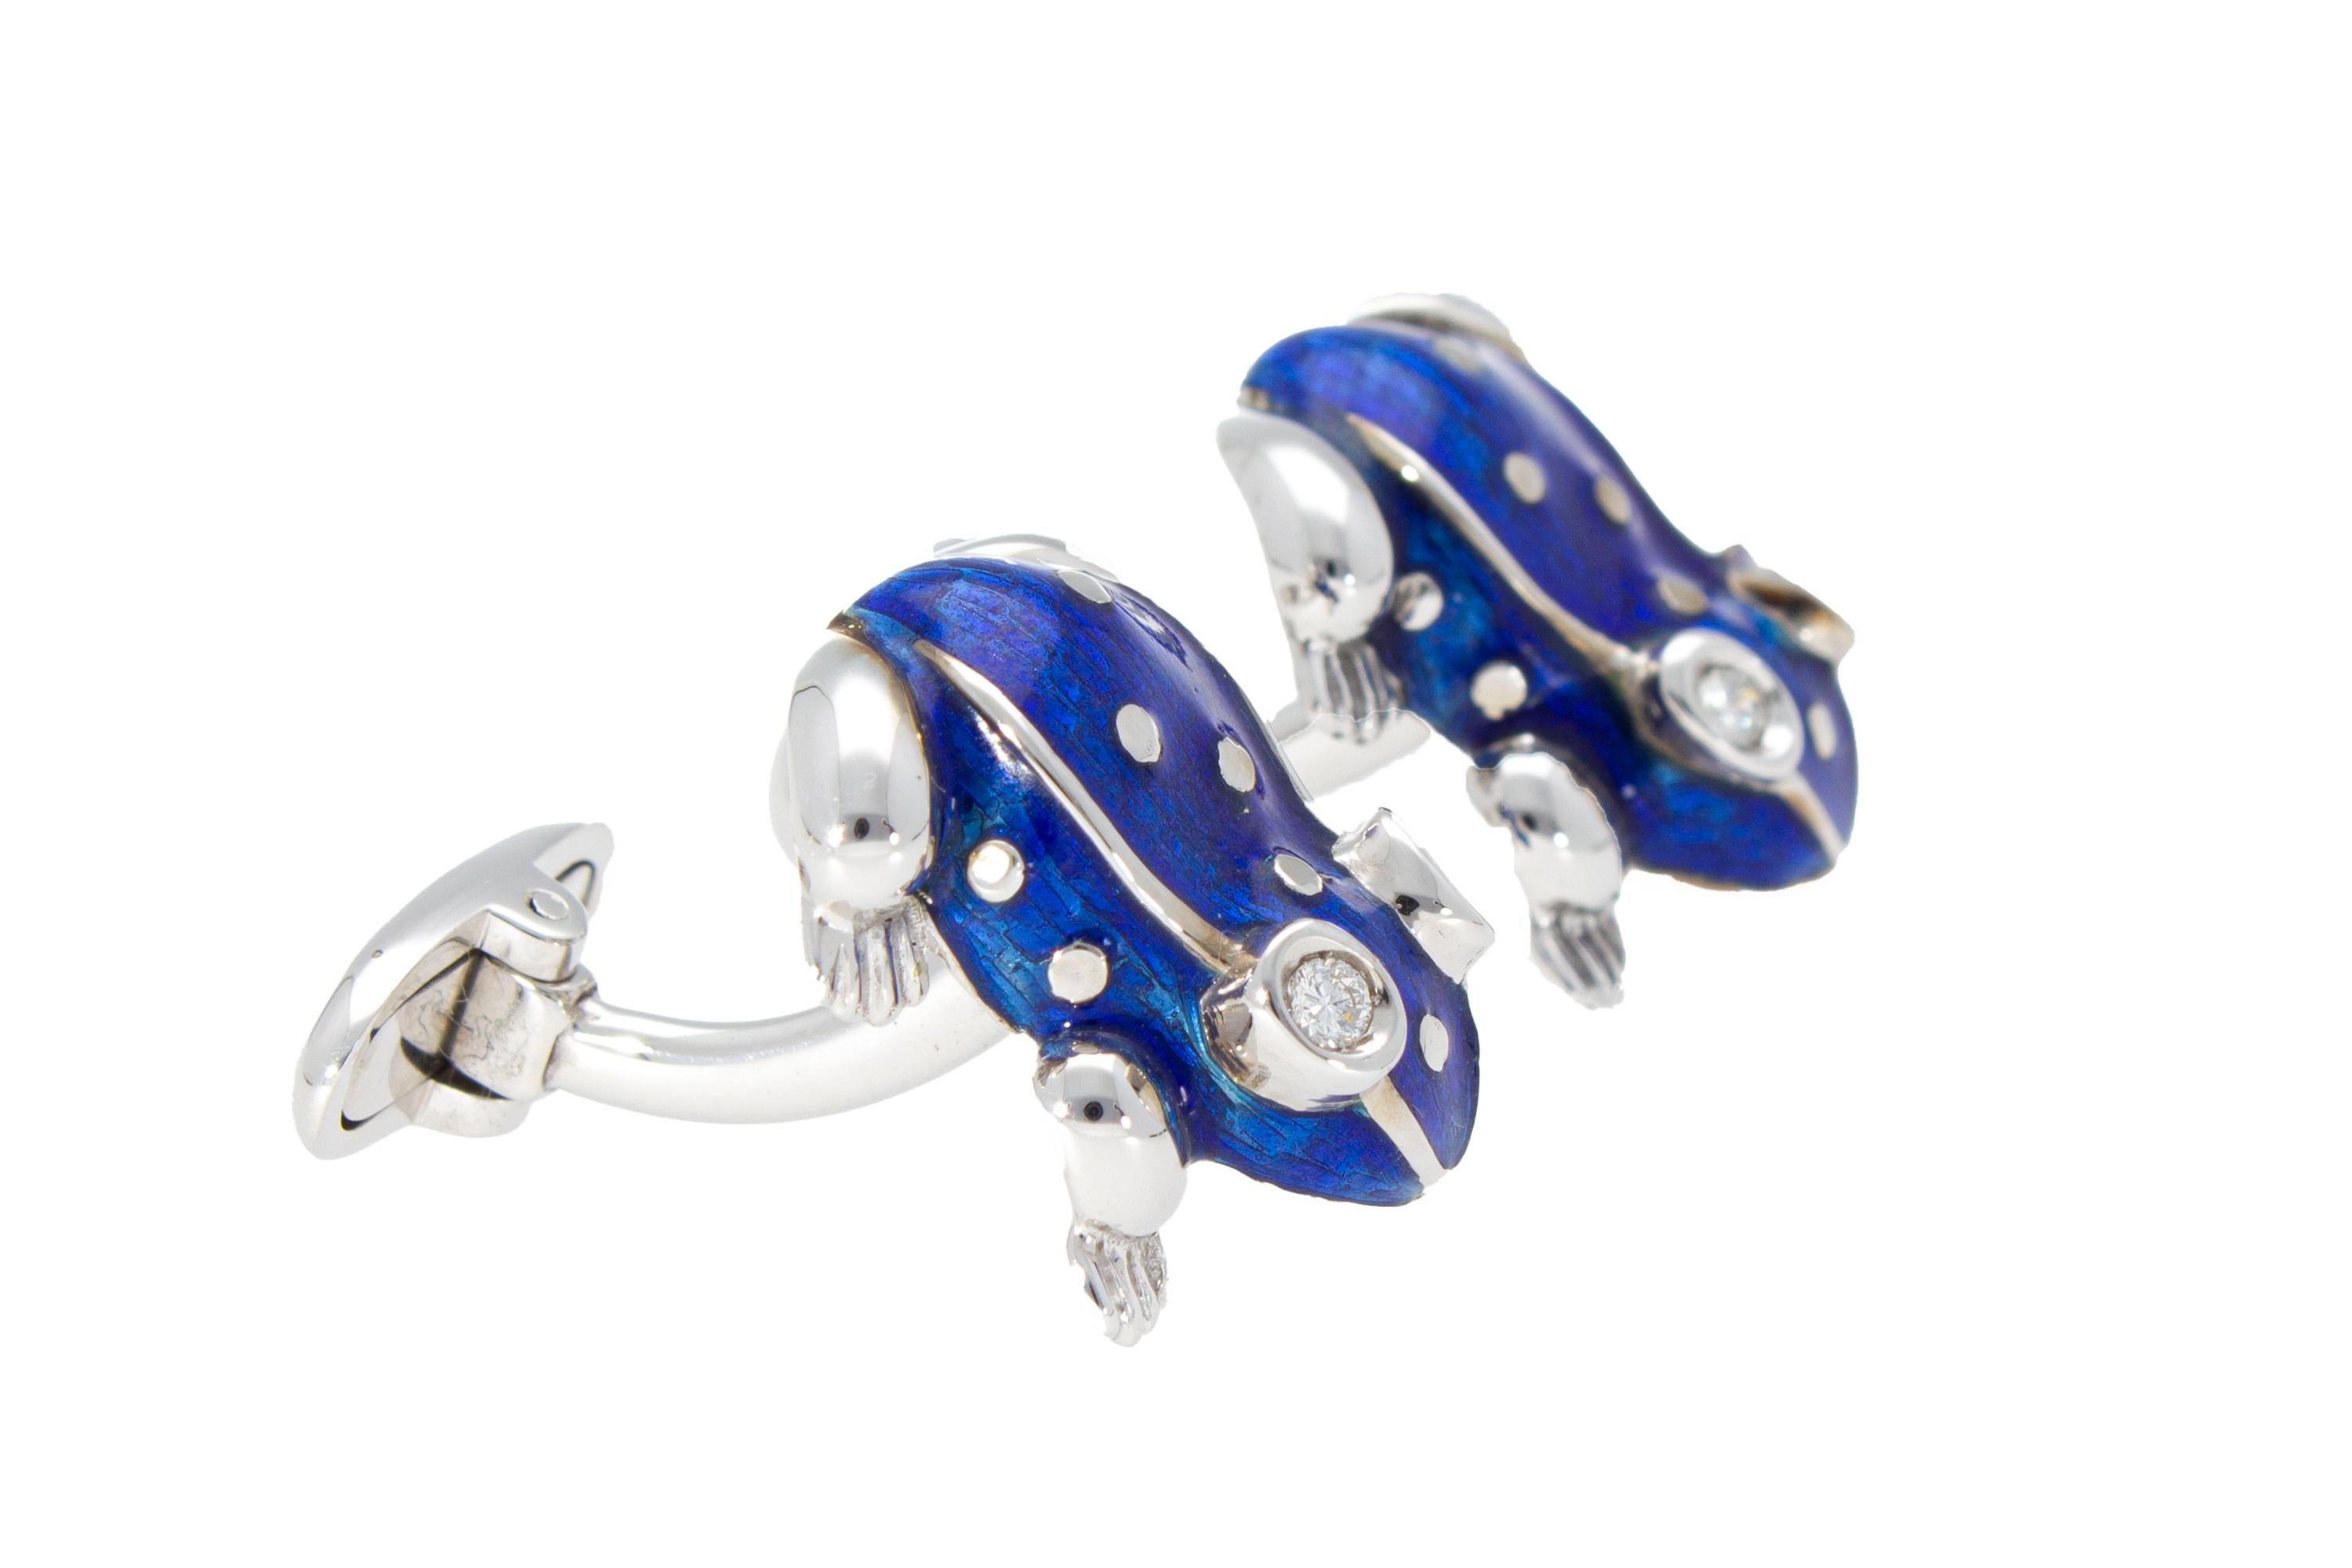 18 Kt White Gold with Blu Enamel Diamonds Frog Cufflinks Handcraft Made in Italy For Sale 6